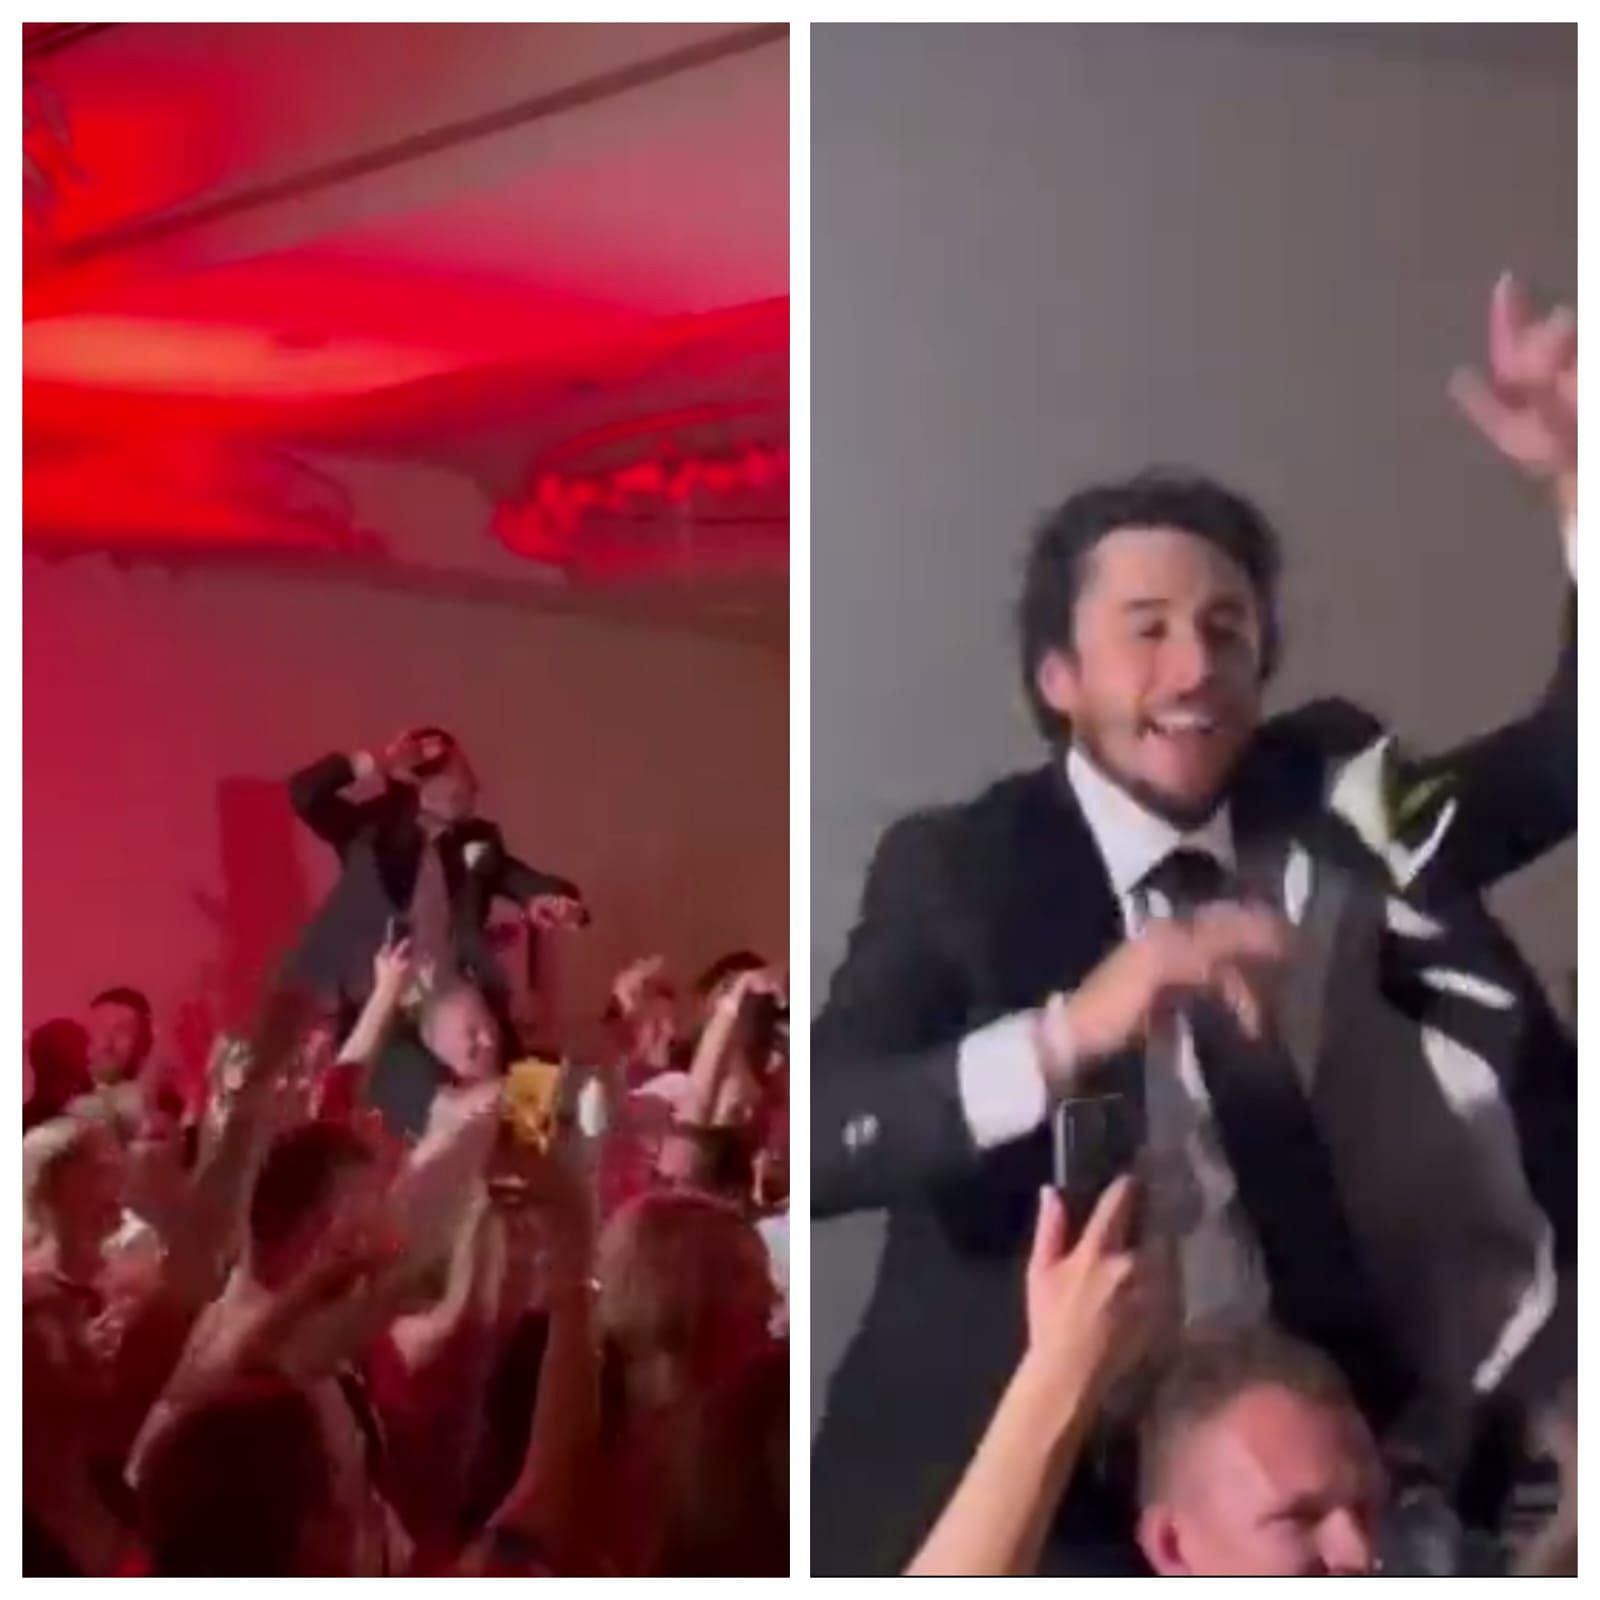 Johnny Gaudreau spotted dancing away on Brady Tkachuk&rsquo;s shoulders during Kevin Hayes&rsquo; wedding